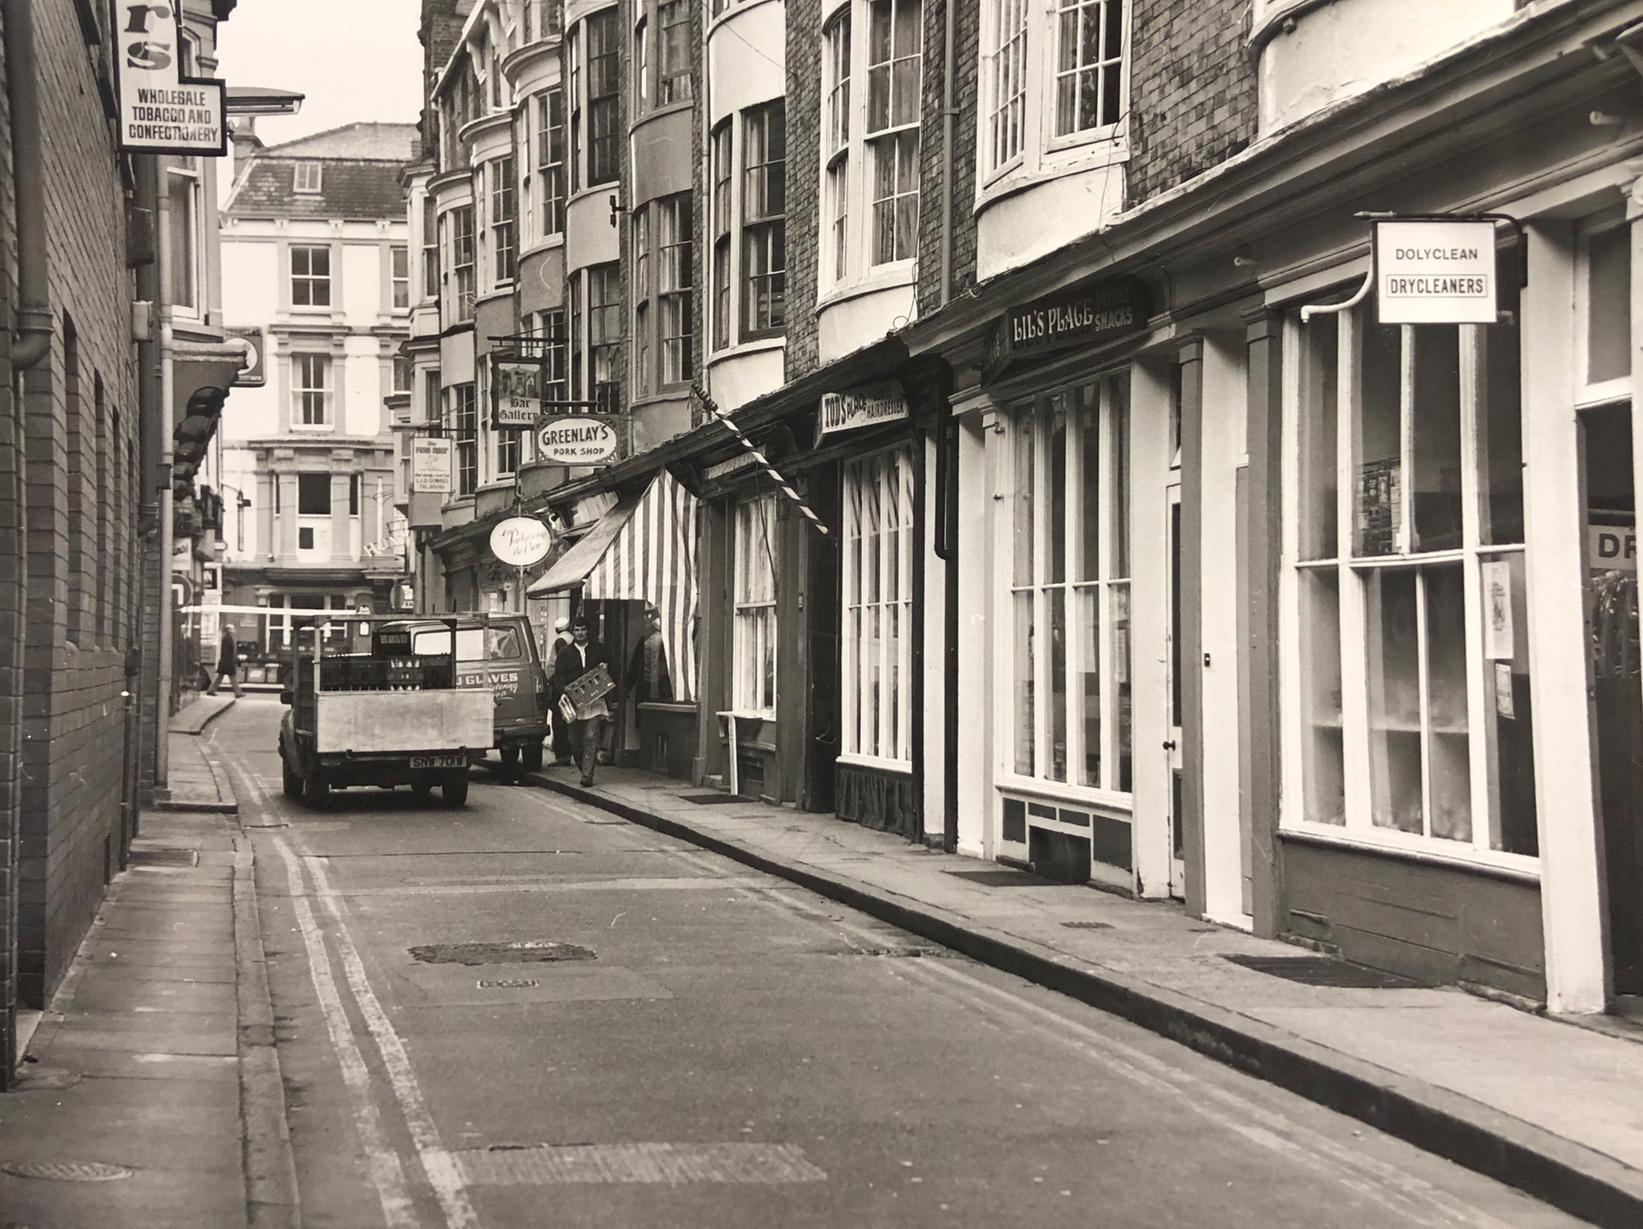 This photo shows the street in 1982 before it was pedestrianised.